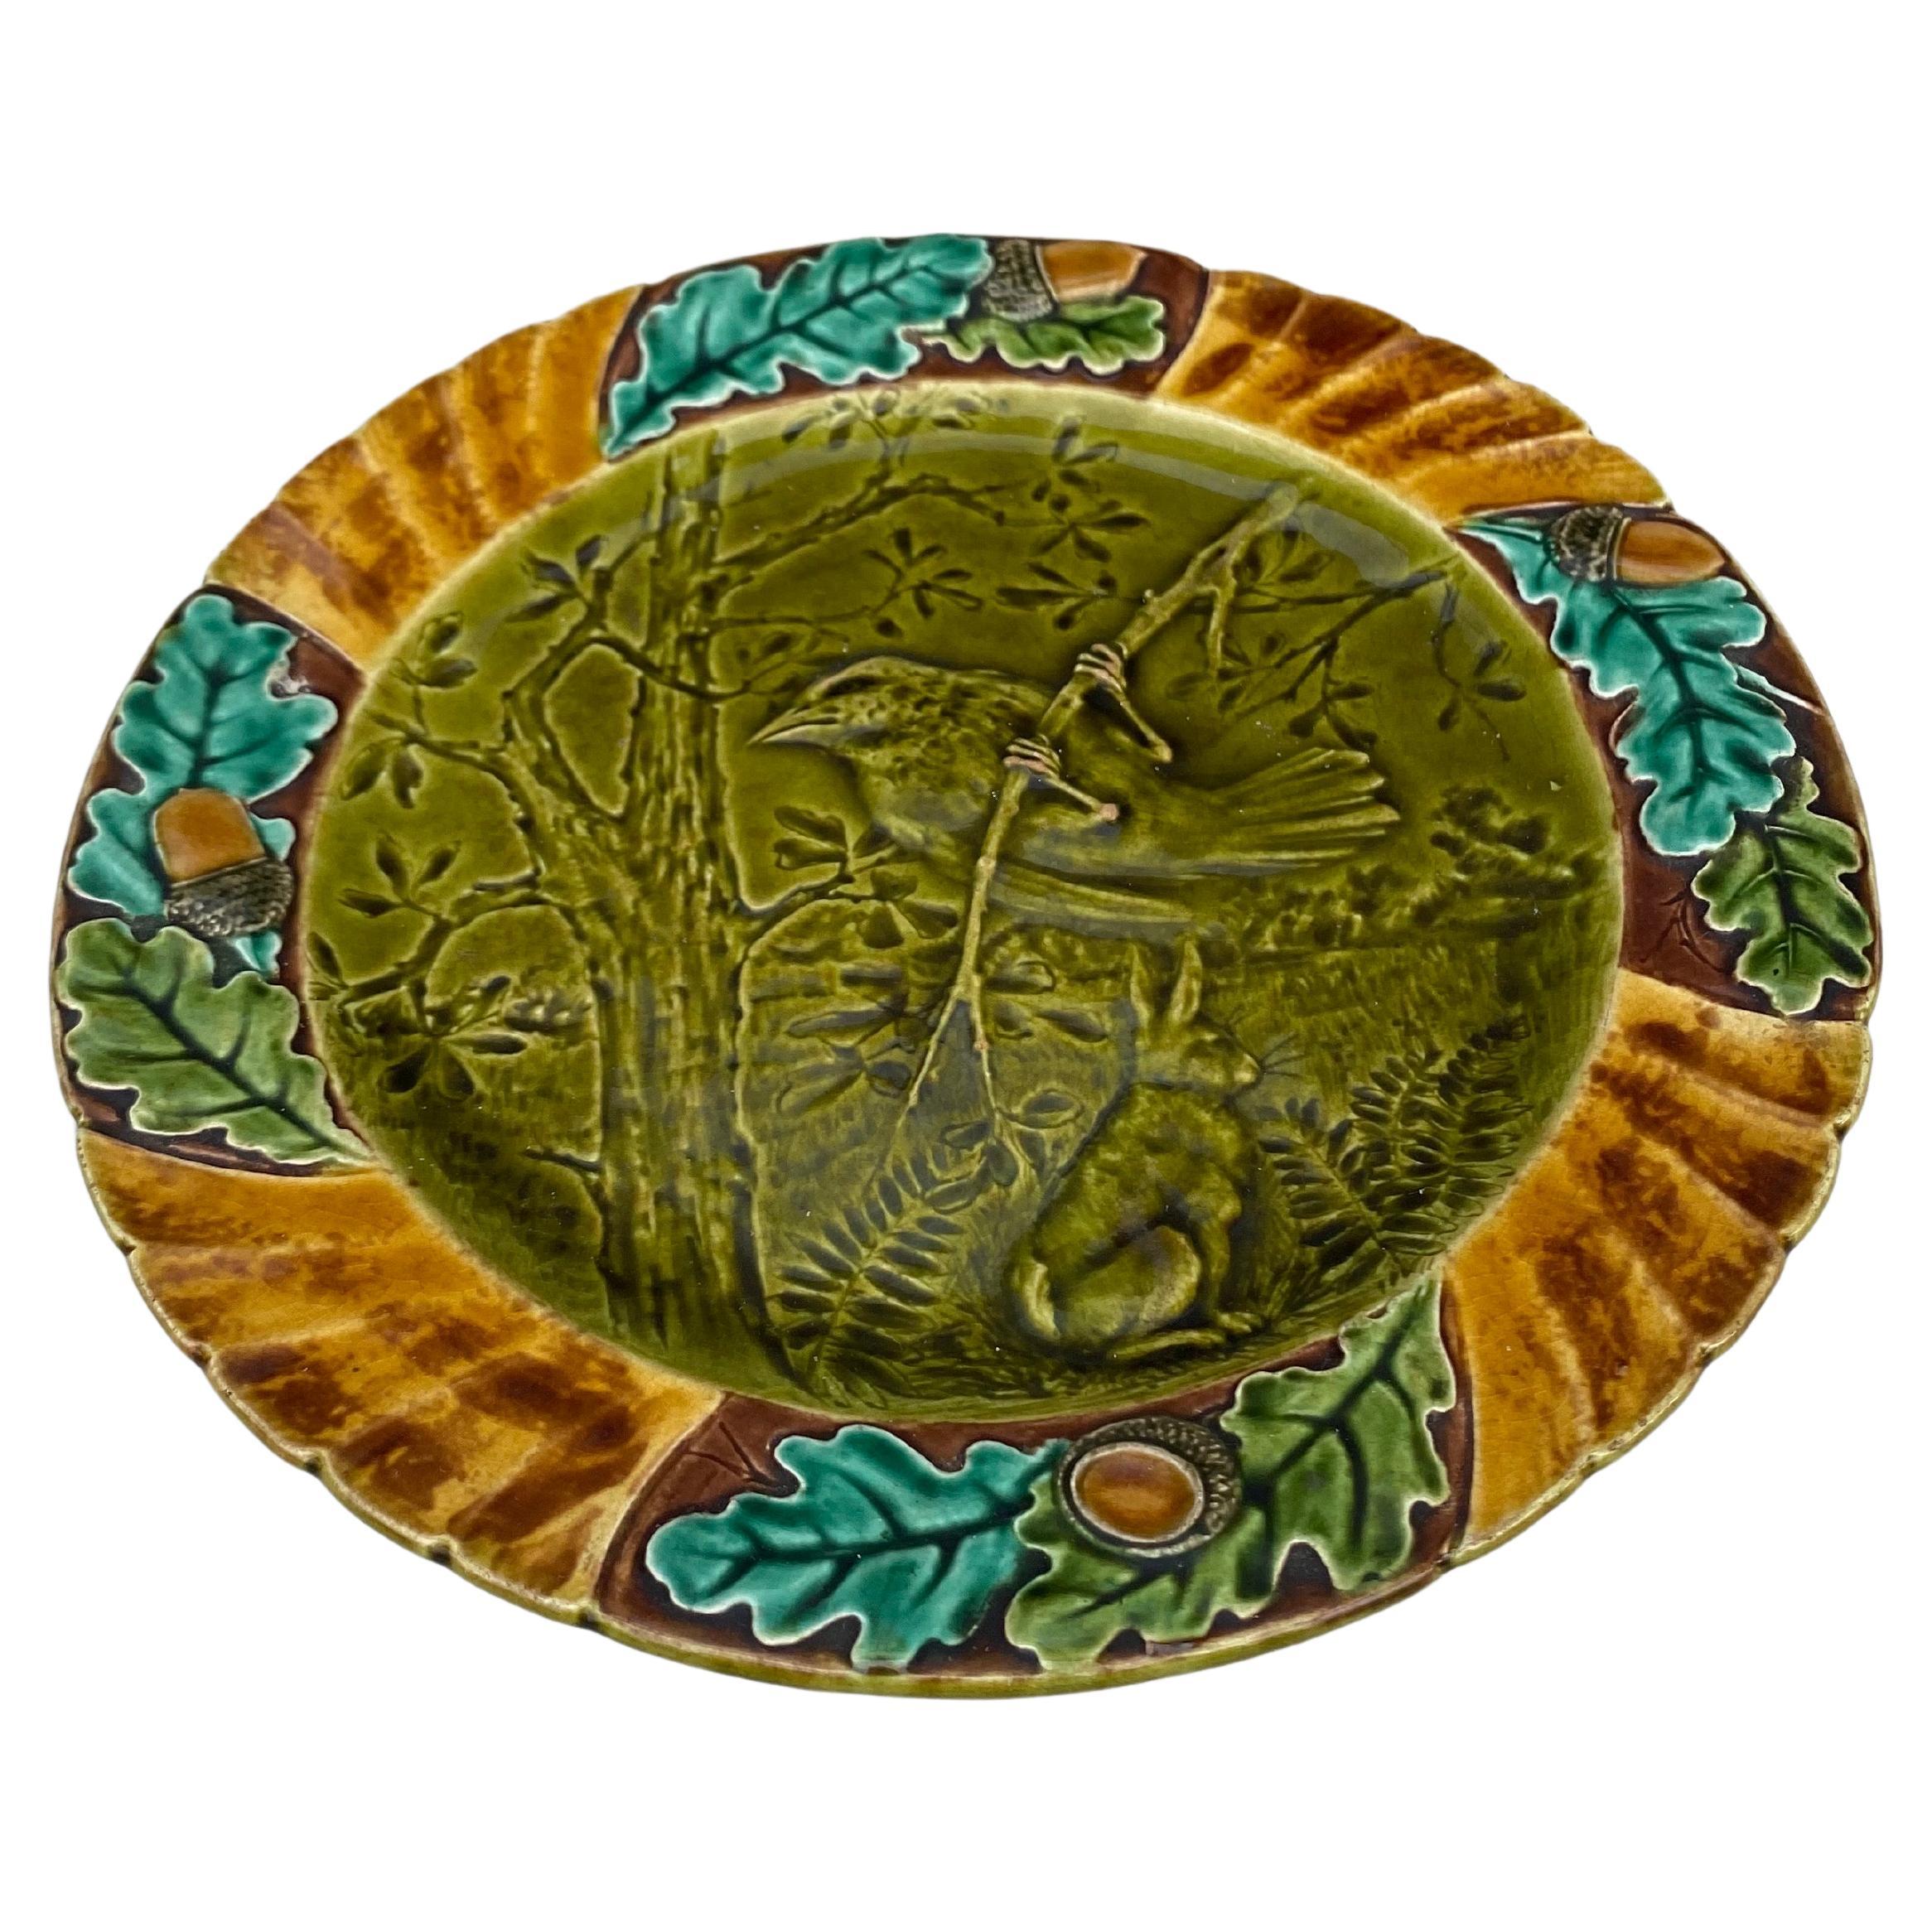 19th century Majolica bird plate signed Sarreguemines.
This plate represent the fall with oak leaves.